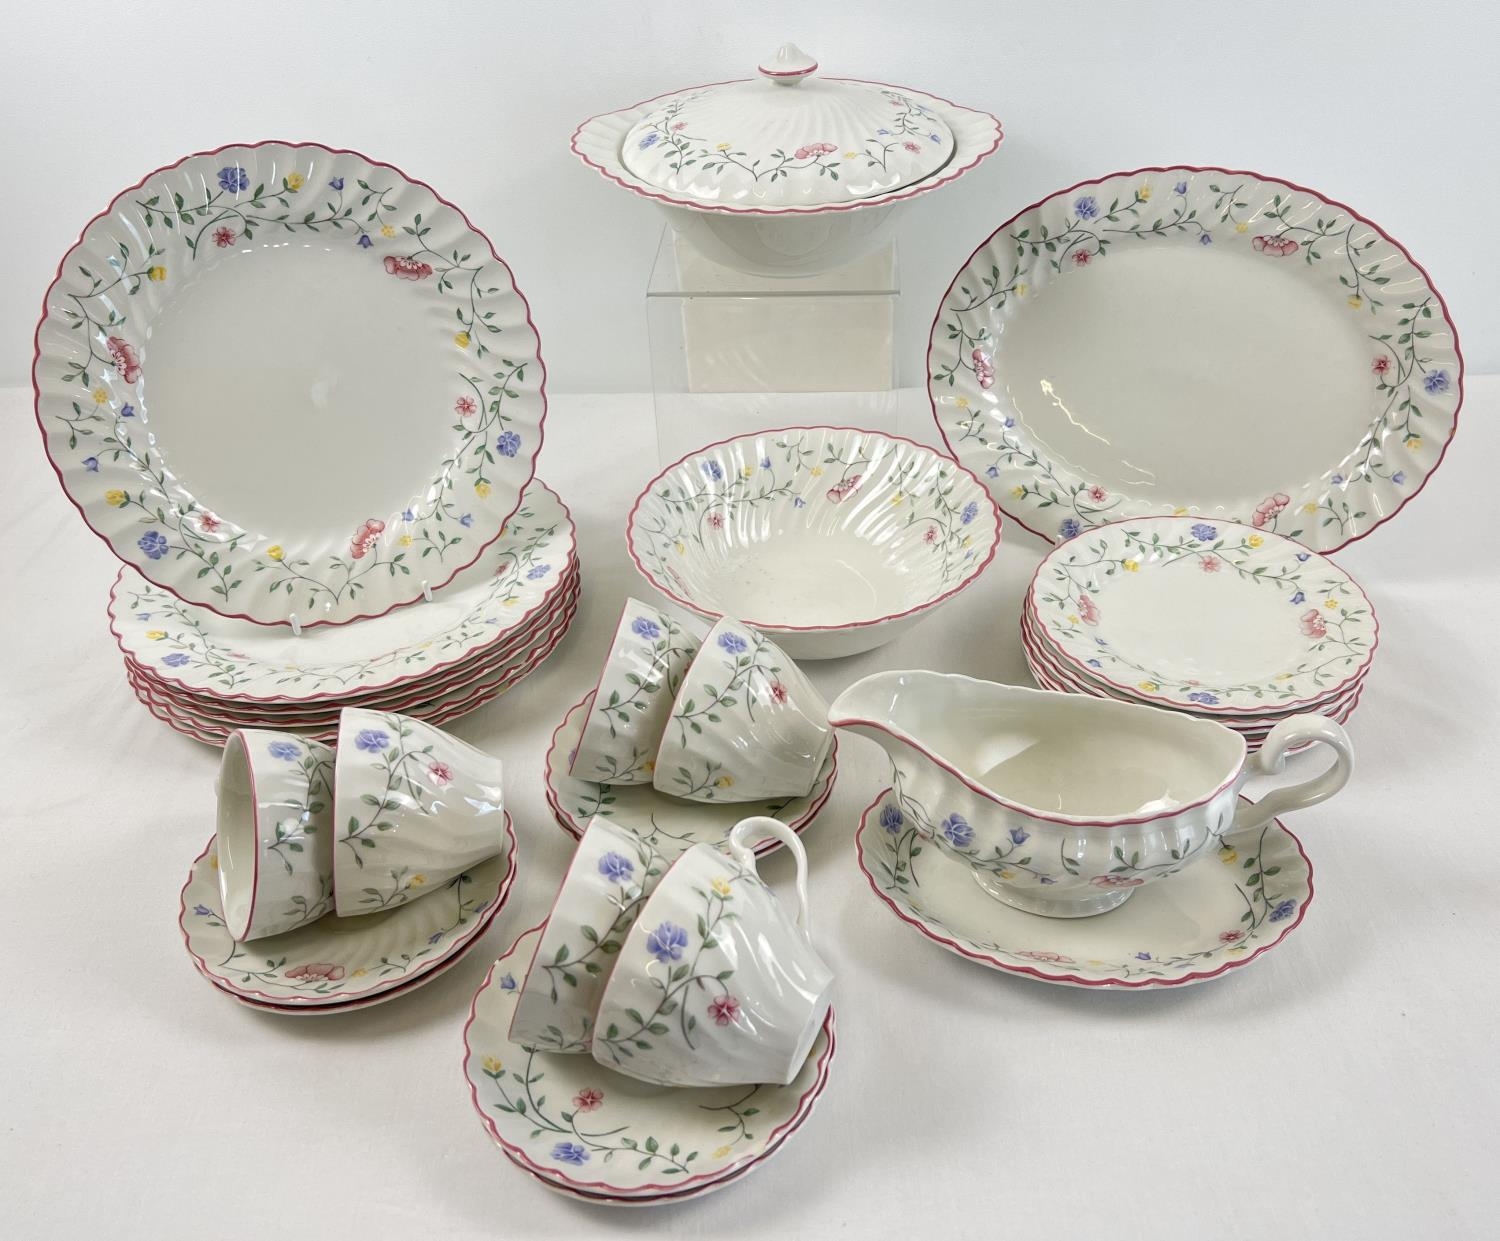 A quantity of assorted Johnson Brothers ceramic dinner & tea ware in "Summer Chintz" pattern.